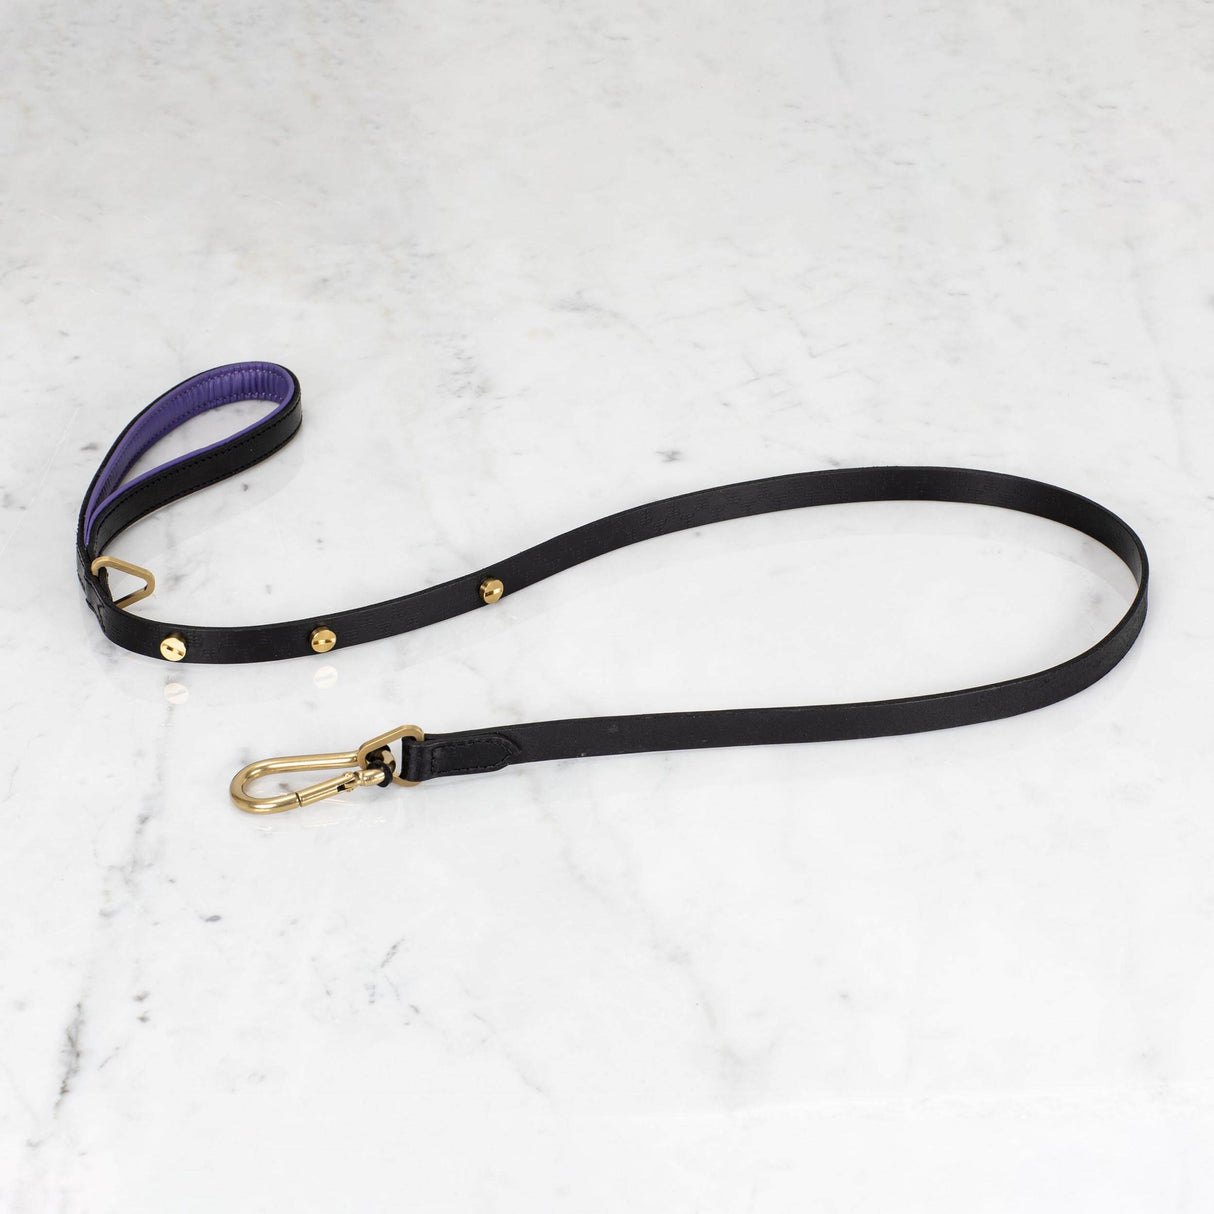 Buster Black and Purple Dog Leash